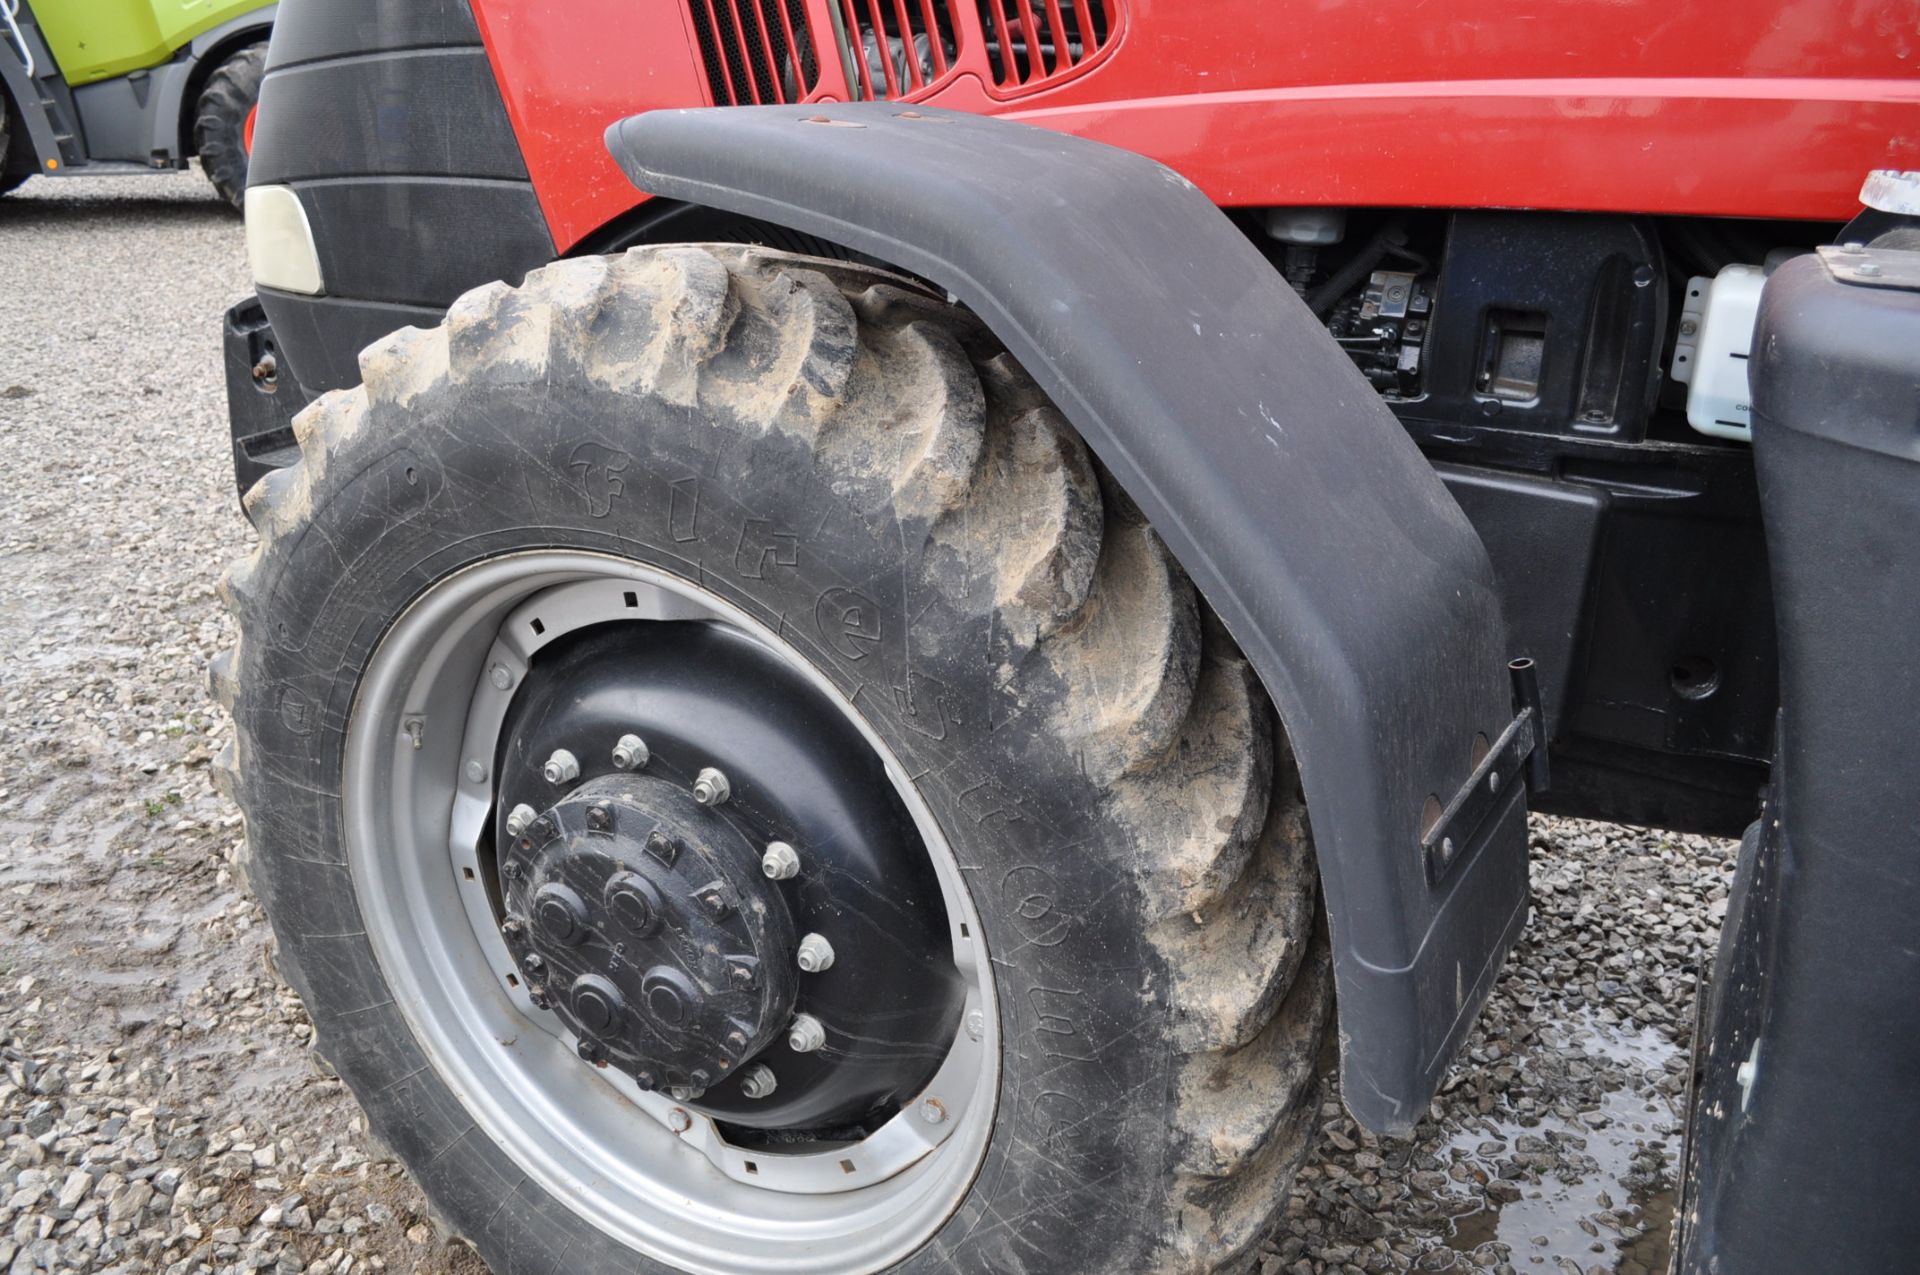 Case IH Magnum 225 tractor, MFWD, 480/80 R 46 duals, 380/85 R 34 front, CVT, 4 hyd remotes, 540/1000 - Image 12 of 27